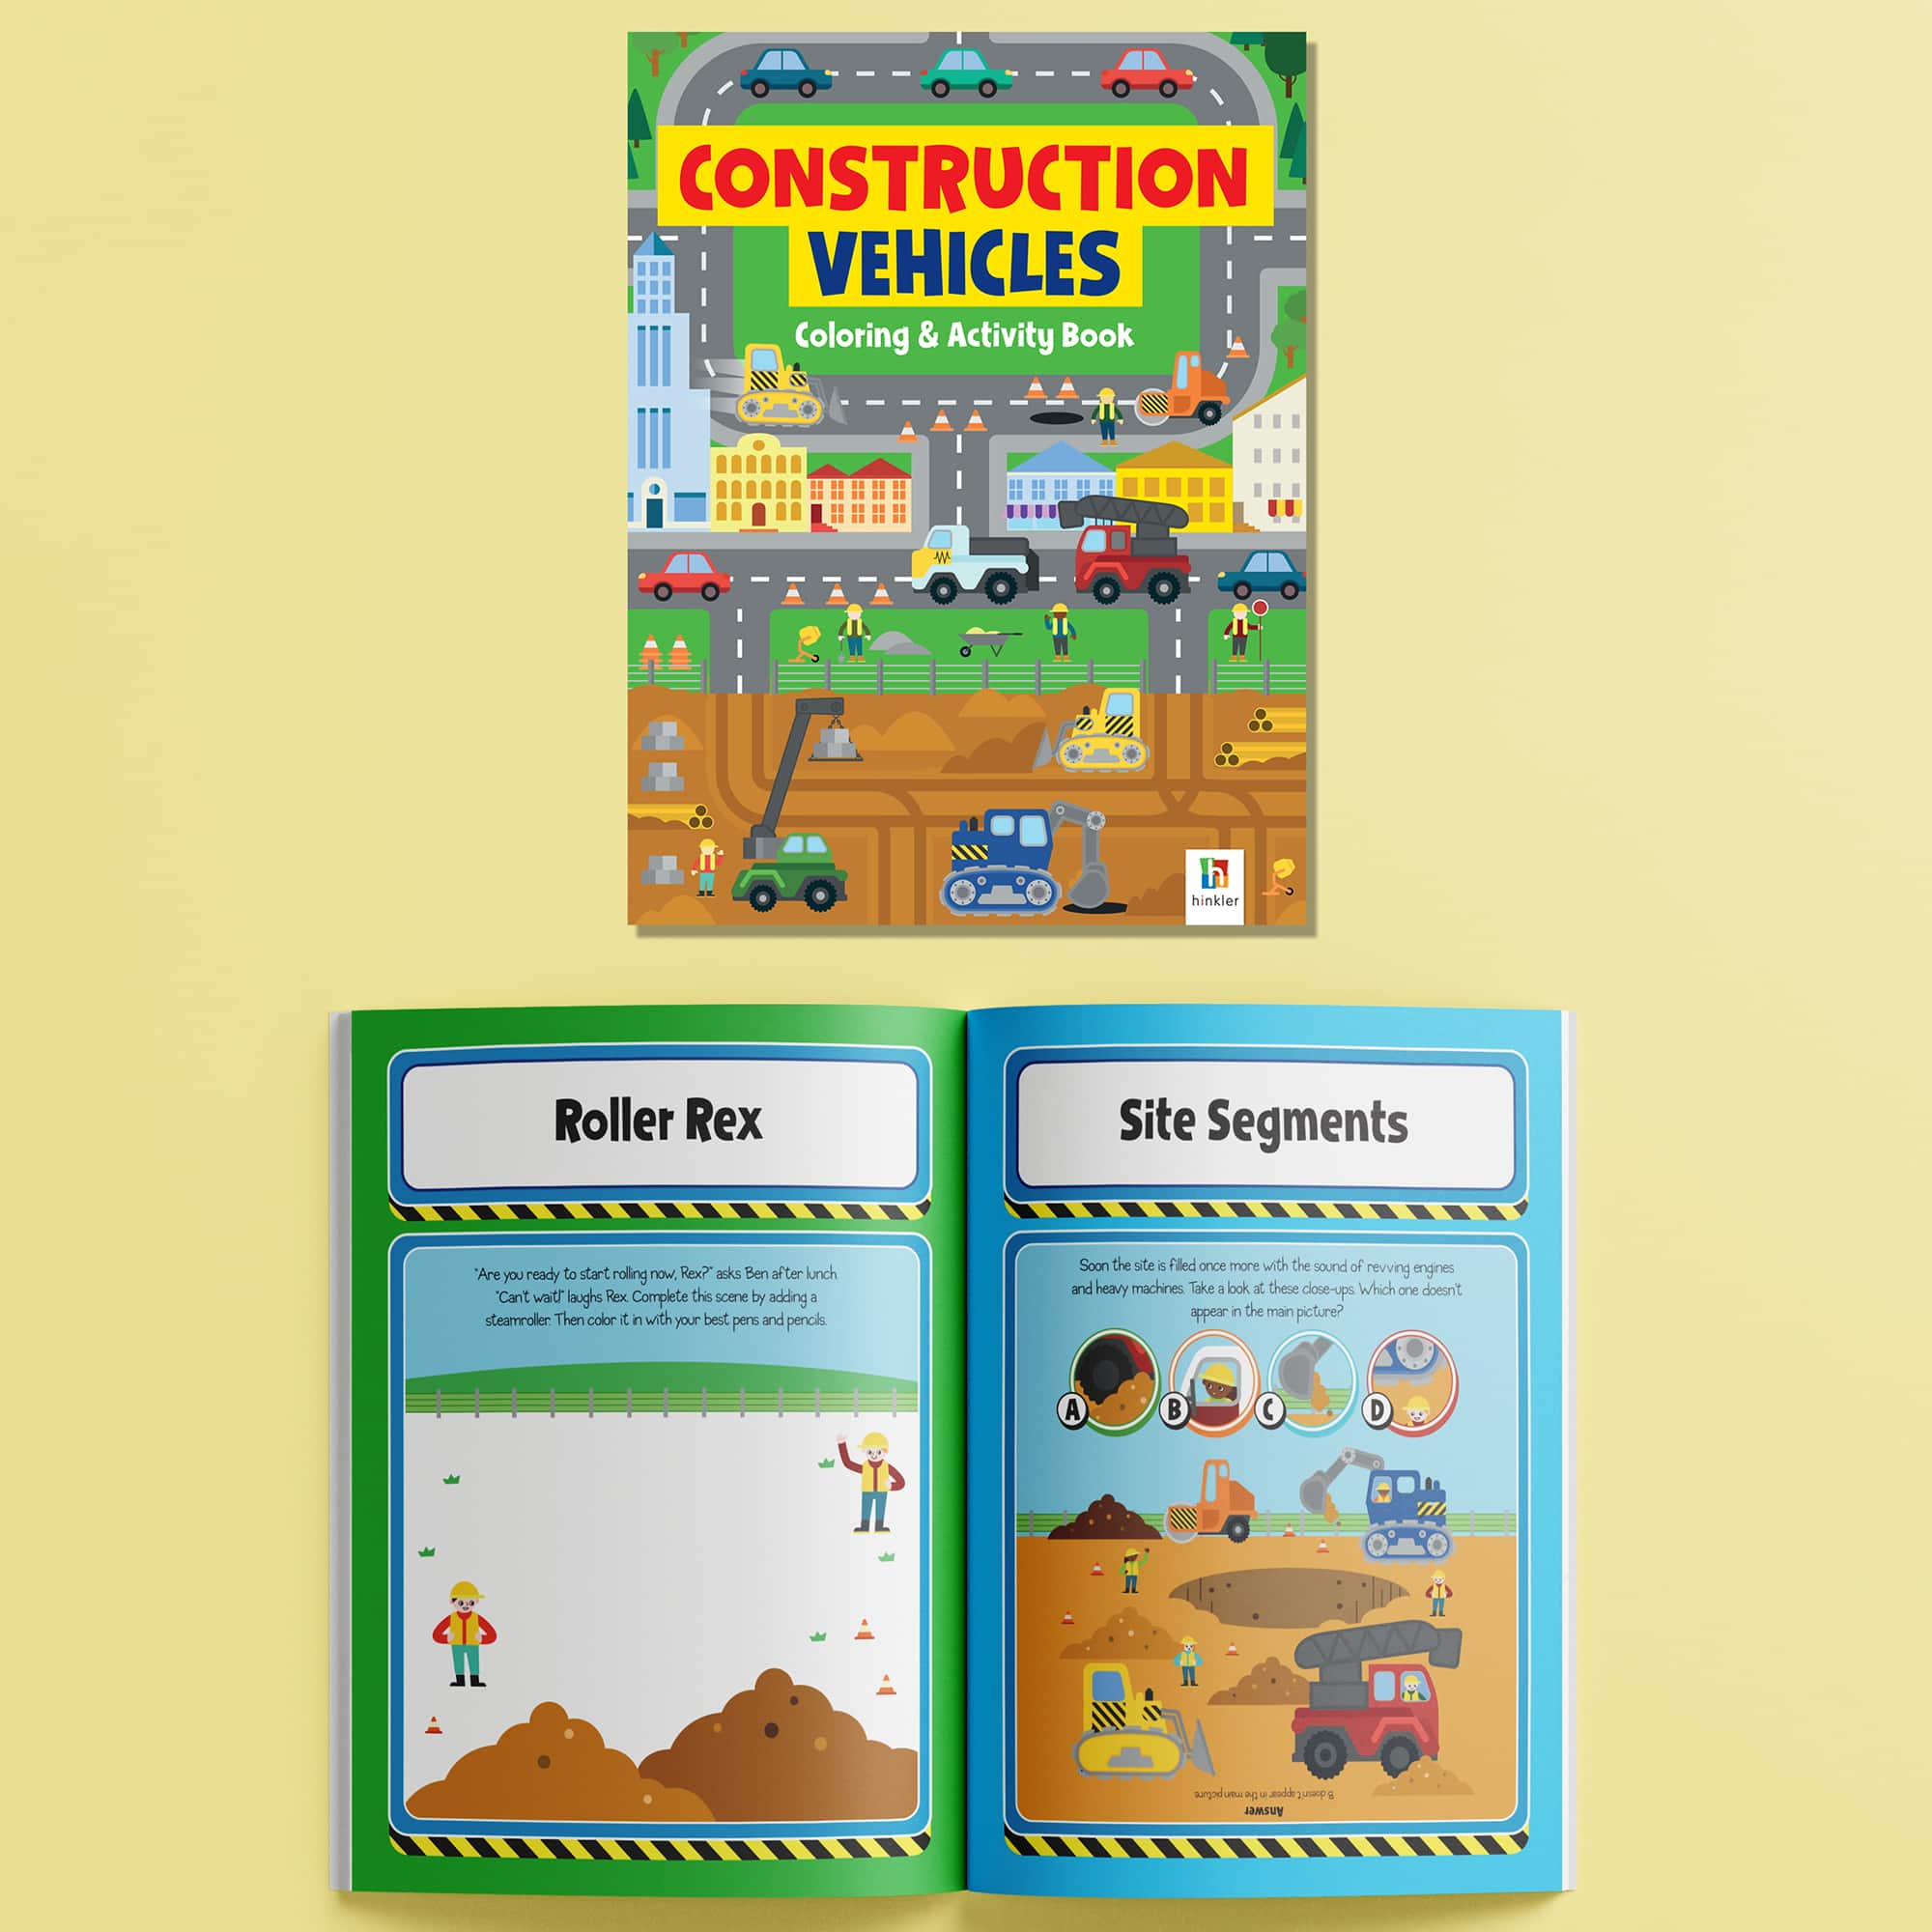 Hinkler Pull-Back and Go Construction Vehicles Floor Puzzle